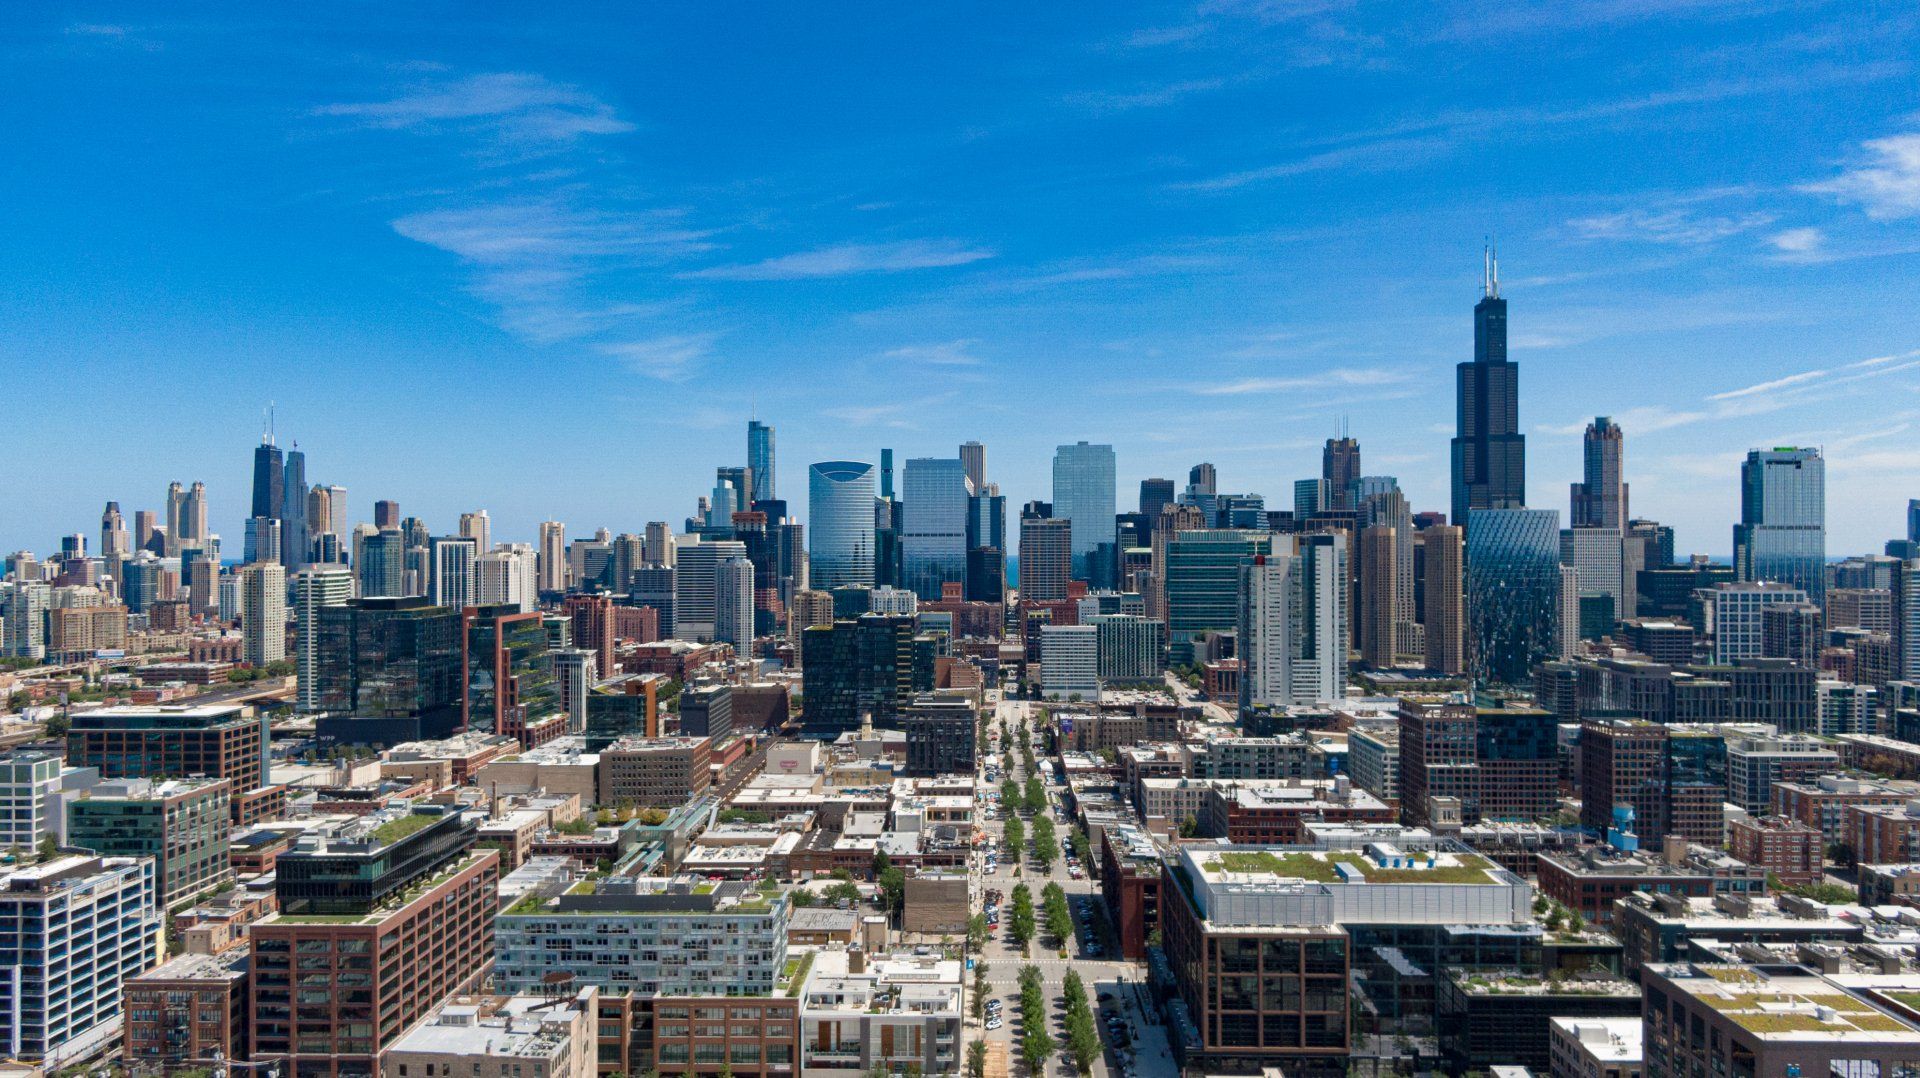 An aerial view of a city skyline on a sunny day.